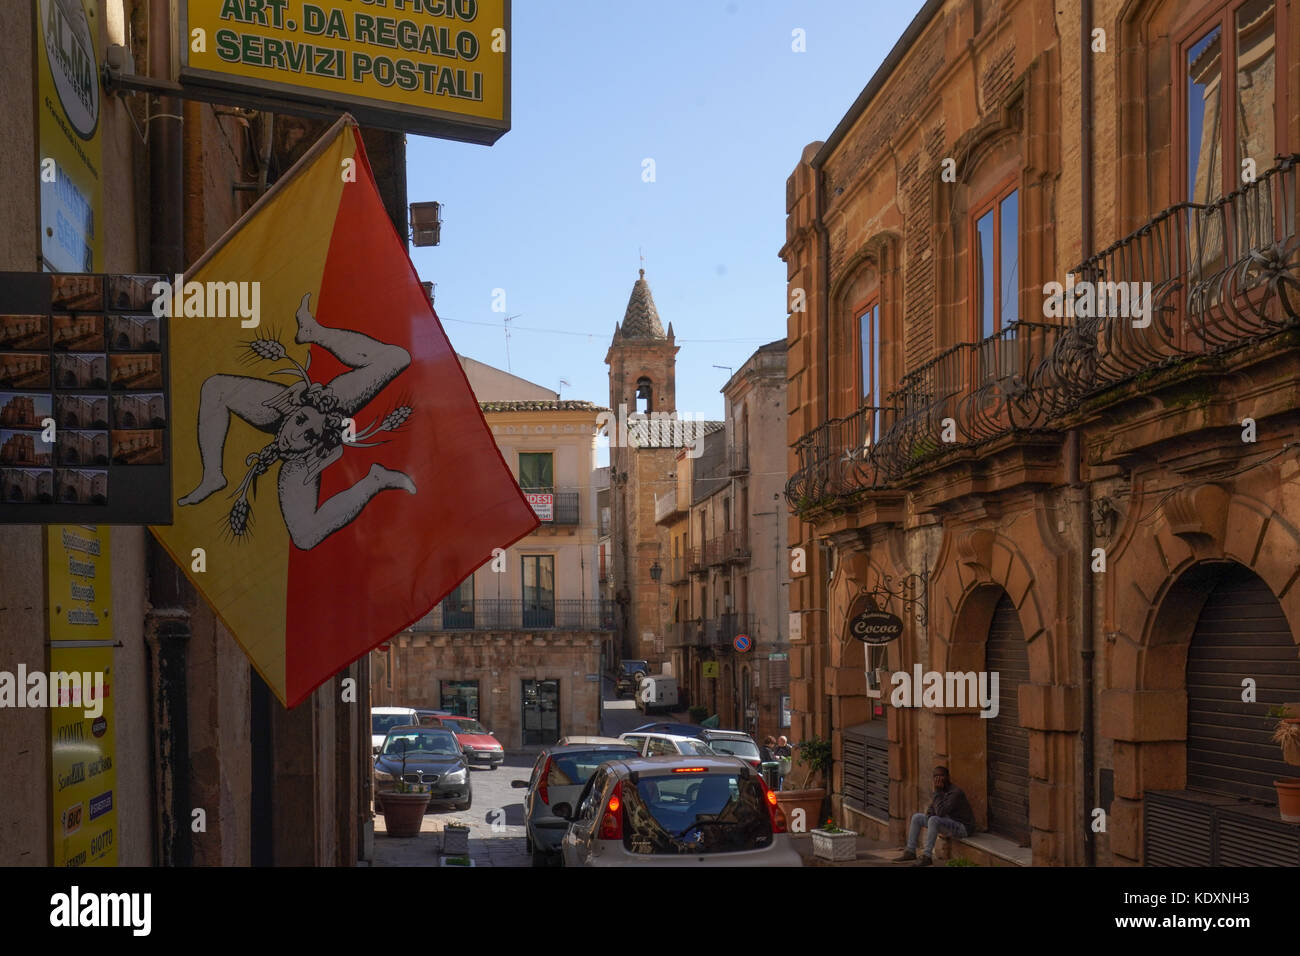 A view of the town of Piazza Armerina with a Sicilian flag in the foreground. From a series of travel photos in Sicily, Italy. Photo date: Thursday, O Stock Photo